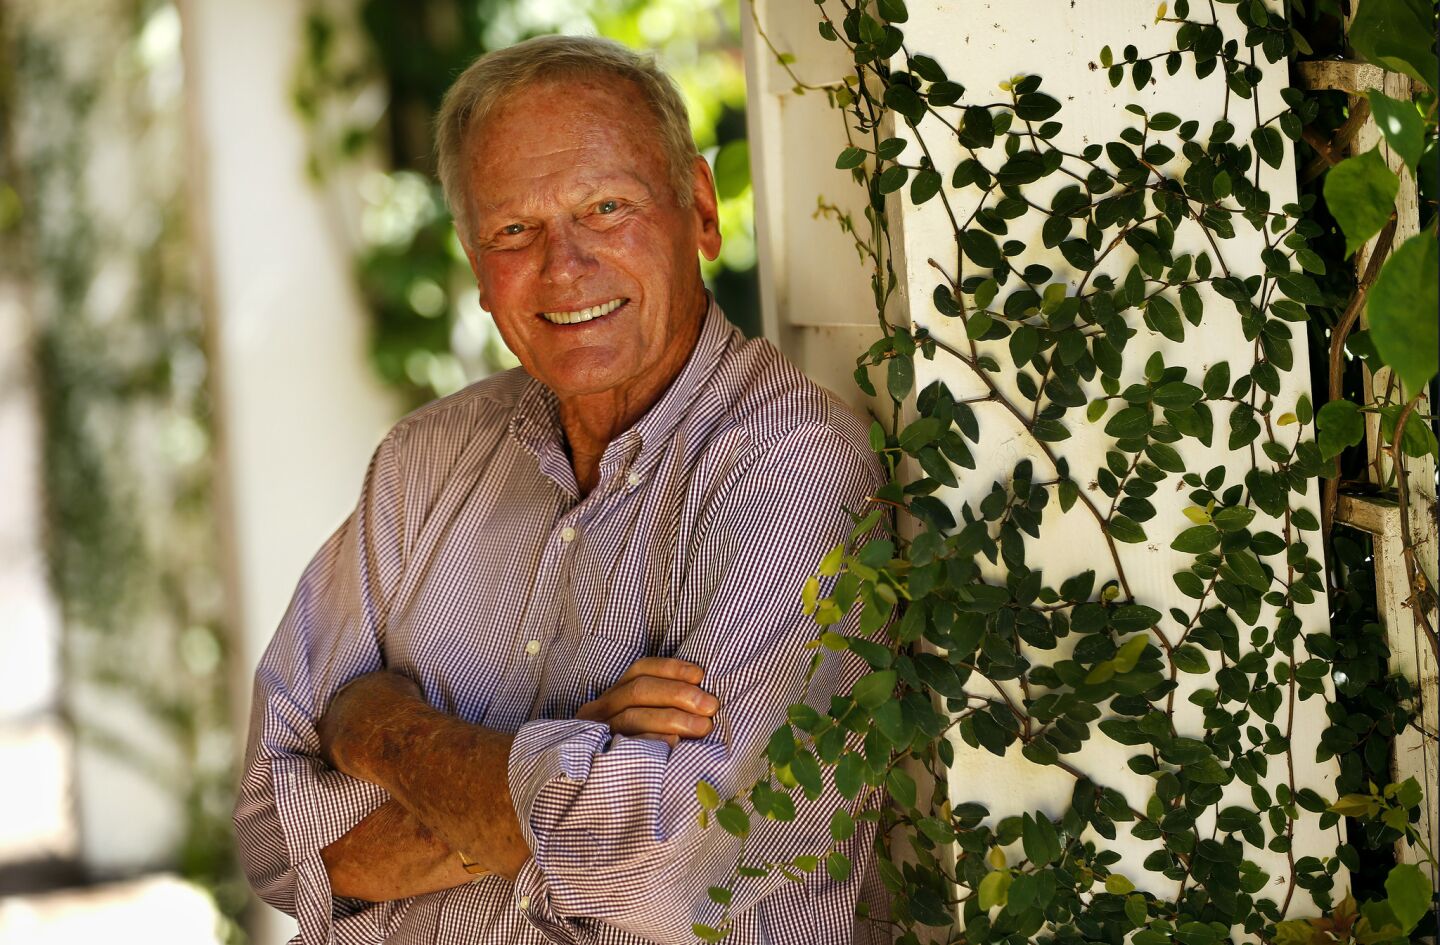 Veteran actor Tab Hunter, who came to fame in the 1950s and was an instant heartthrob though he had to keep the fact he was gay a secret, at the Los Angeles Equestrian Center in Burbank on September 2015.